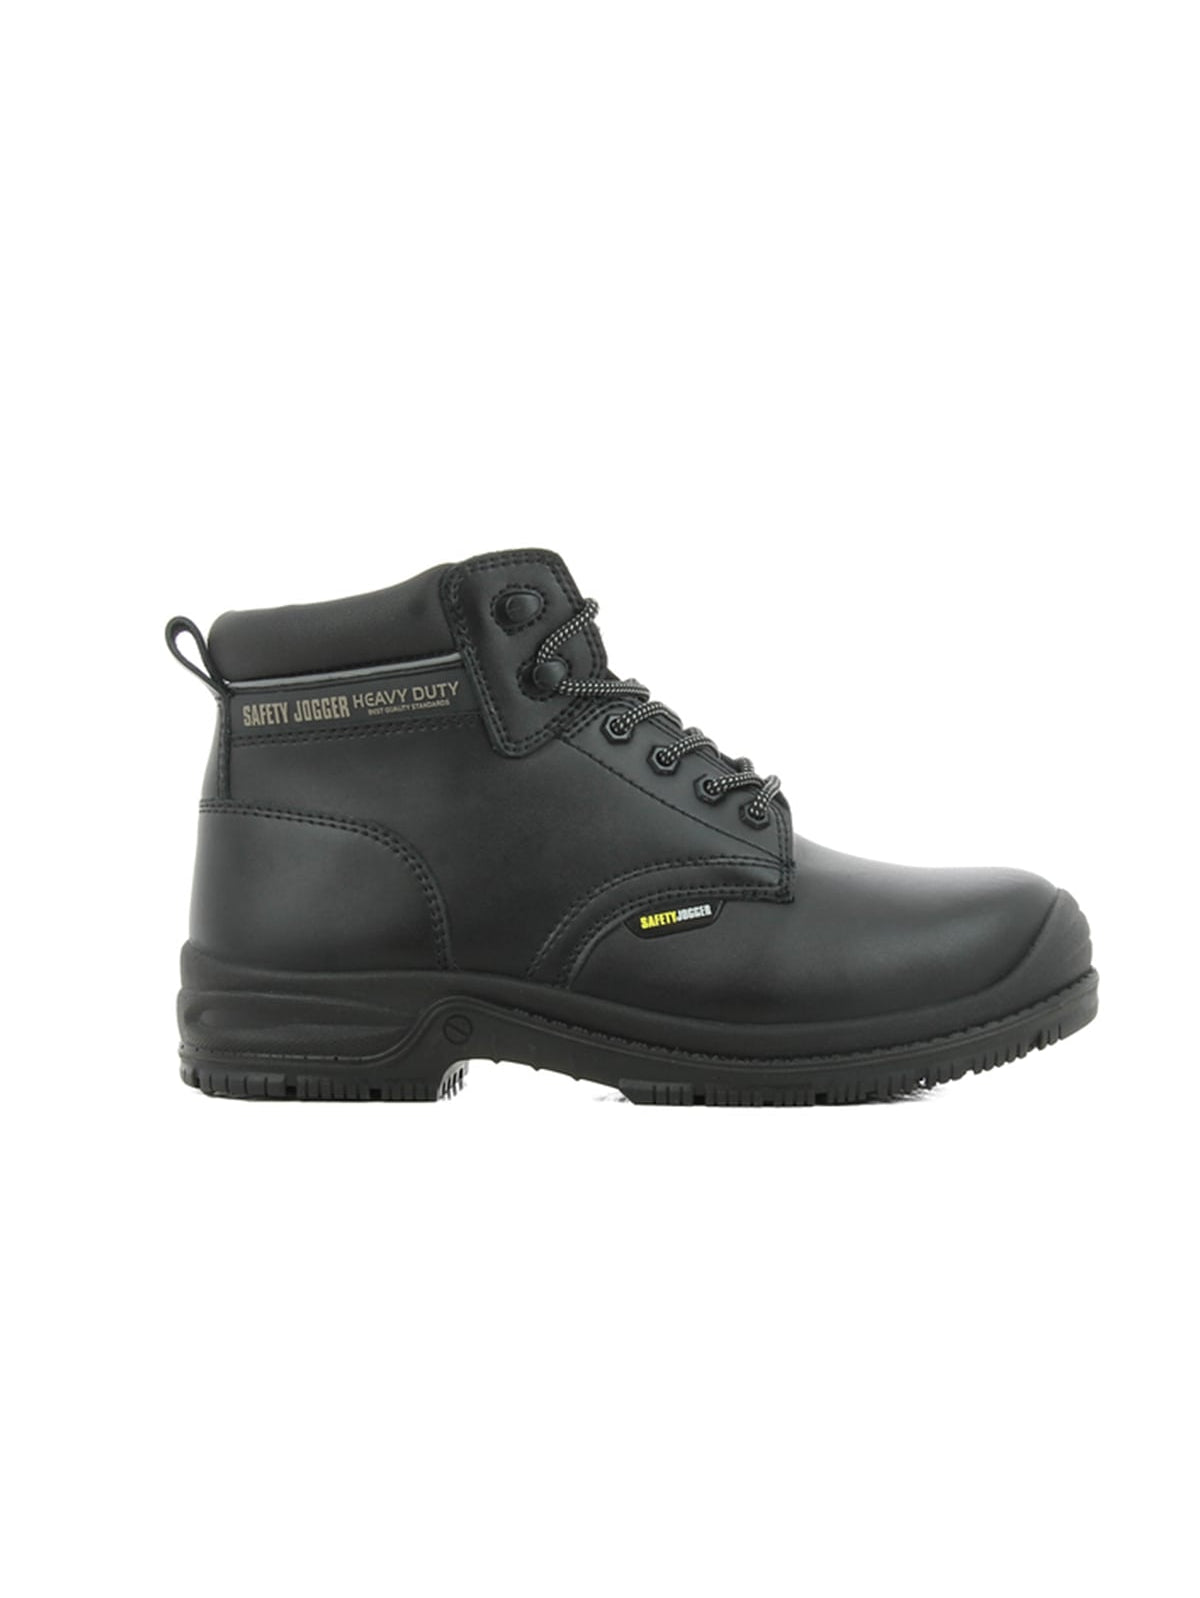 Unisex Safety Shoe X1100N81 (S3) by Shoes For Crews -  ChefsCotton